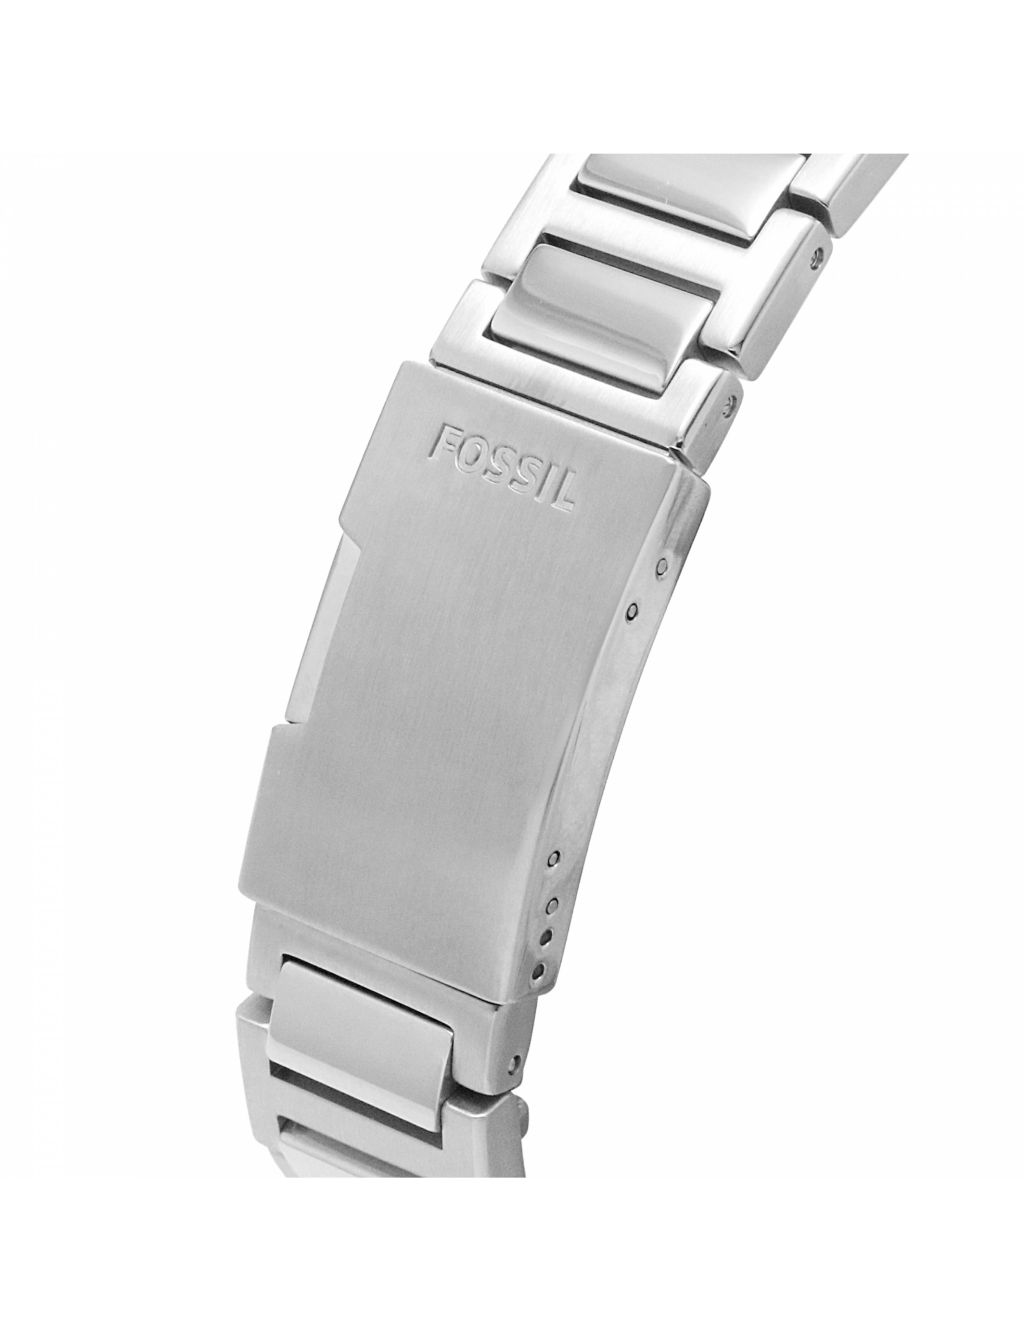 Fossil Everett Stainless Steel Chronograph Watch image 6